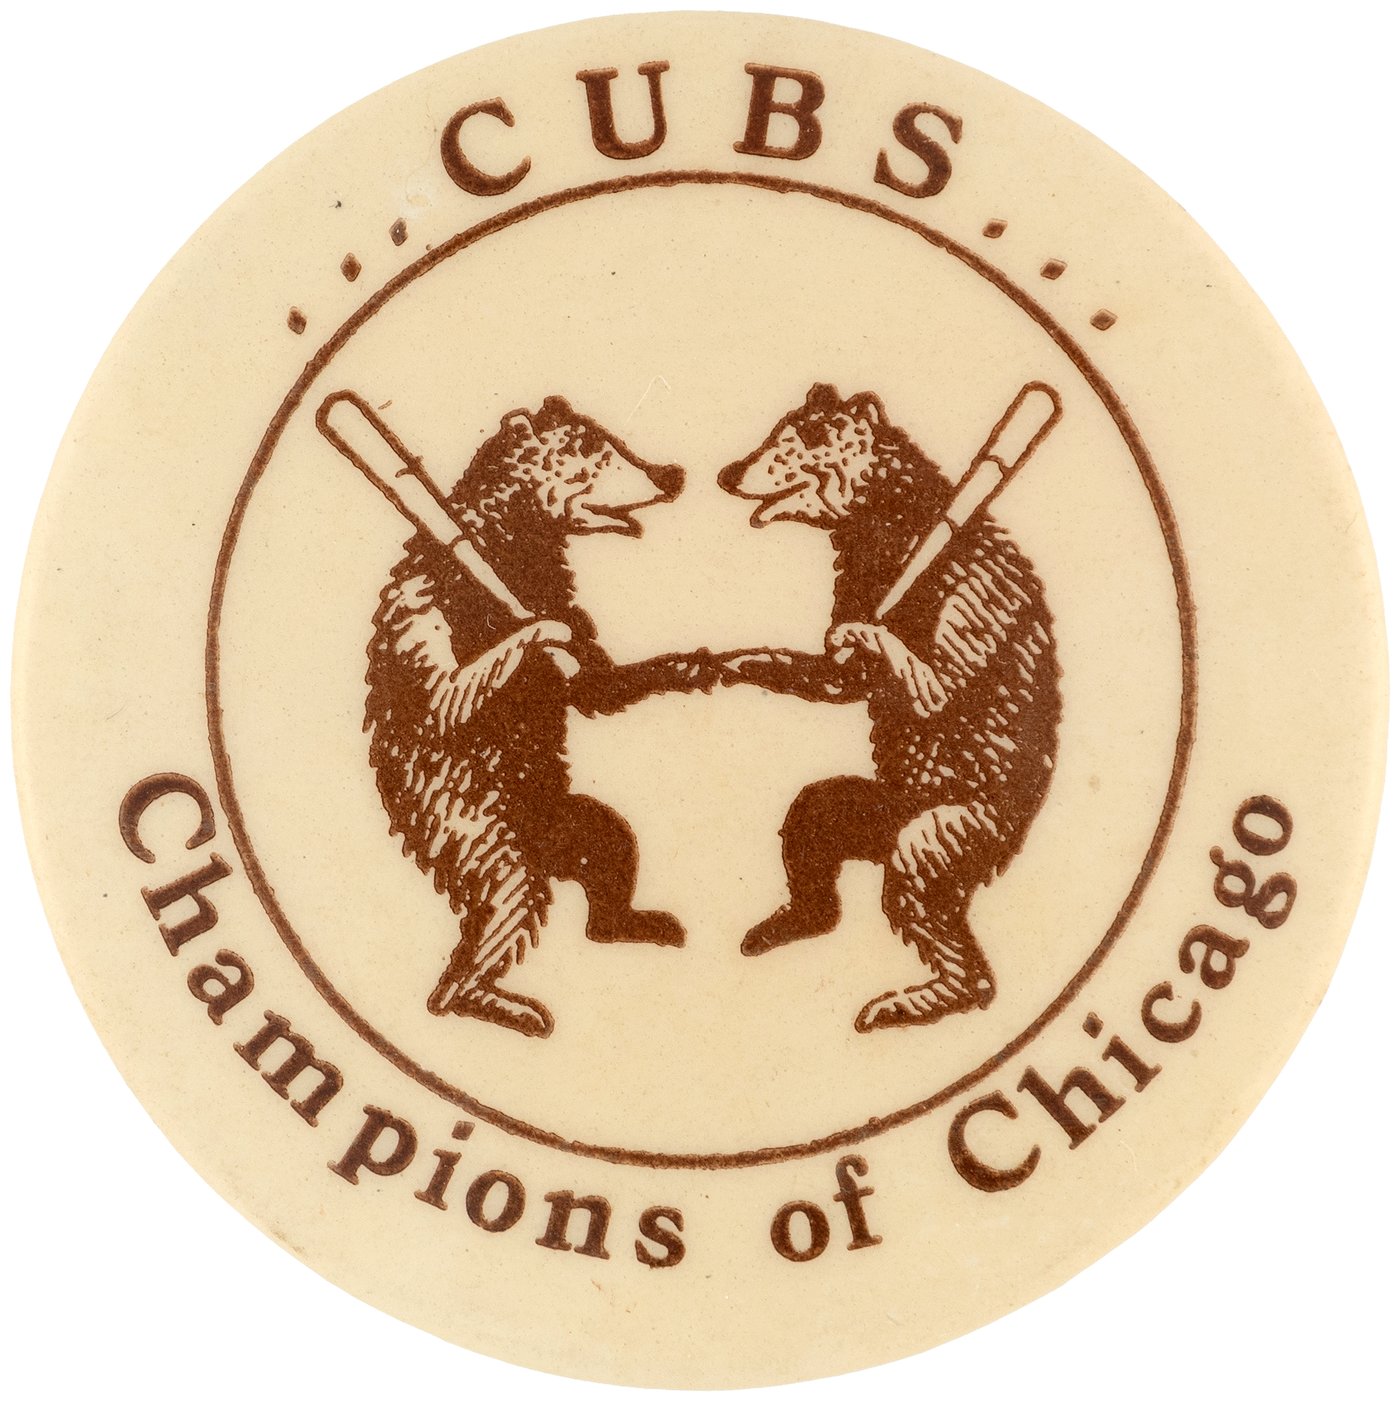 Hake's - C. 1906-1908 CHICAGO CUBS CHAMPIONS OF CHICAGO BUTTON (VARIETY).